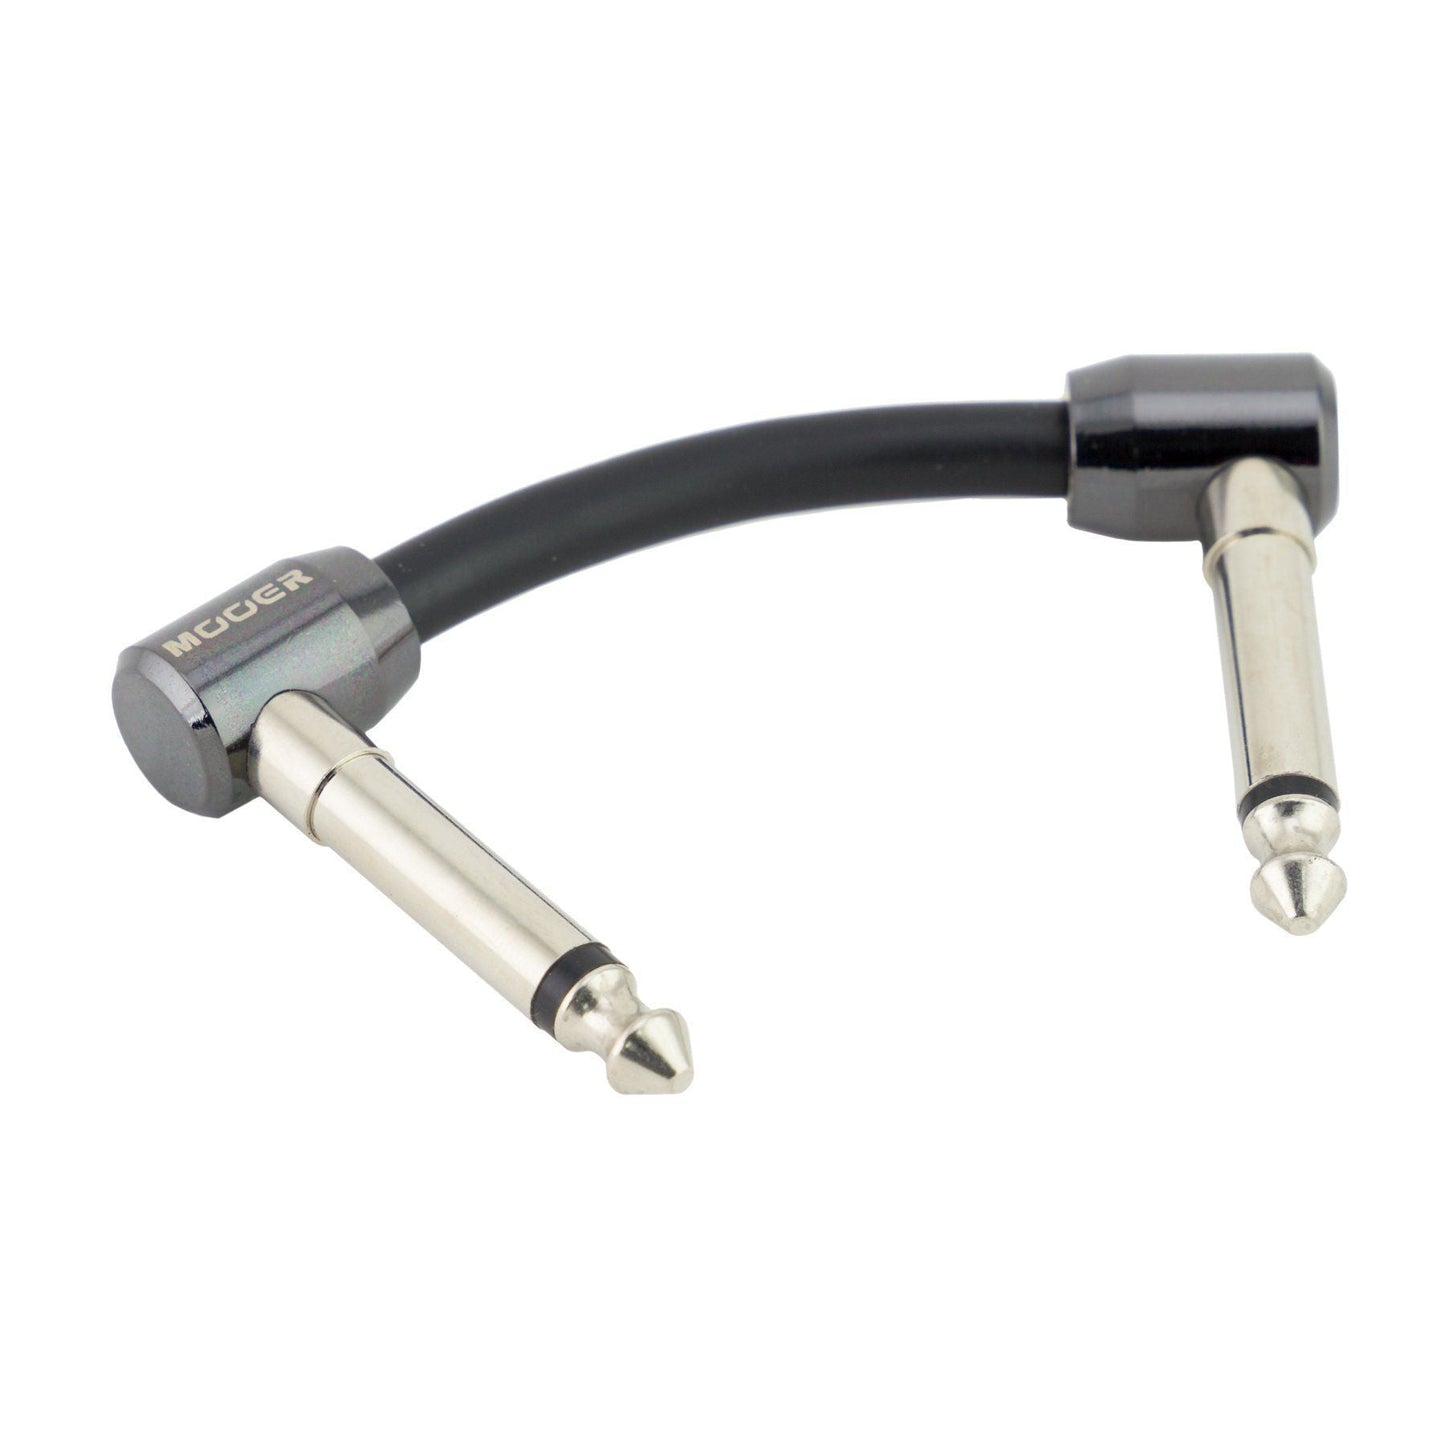 Mooer 2" Patch Cable